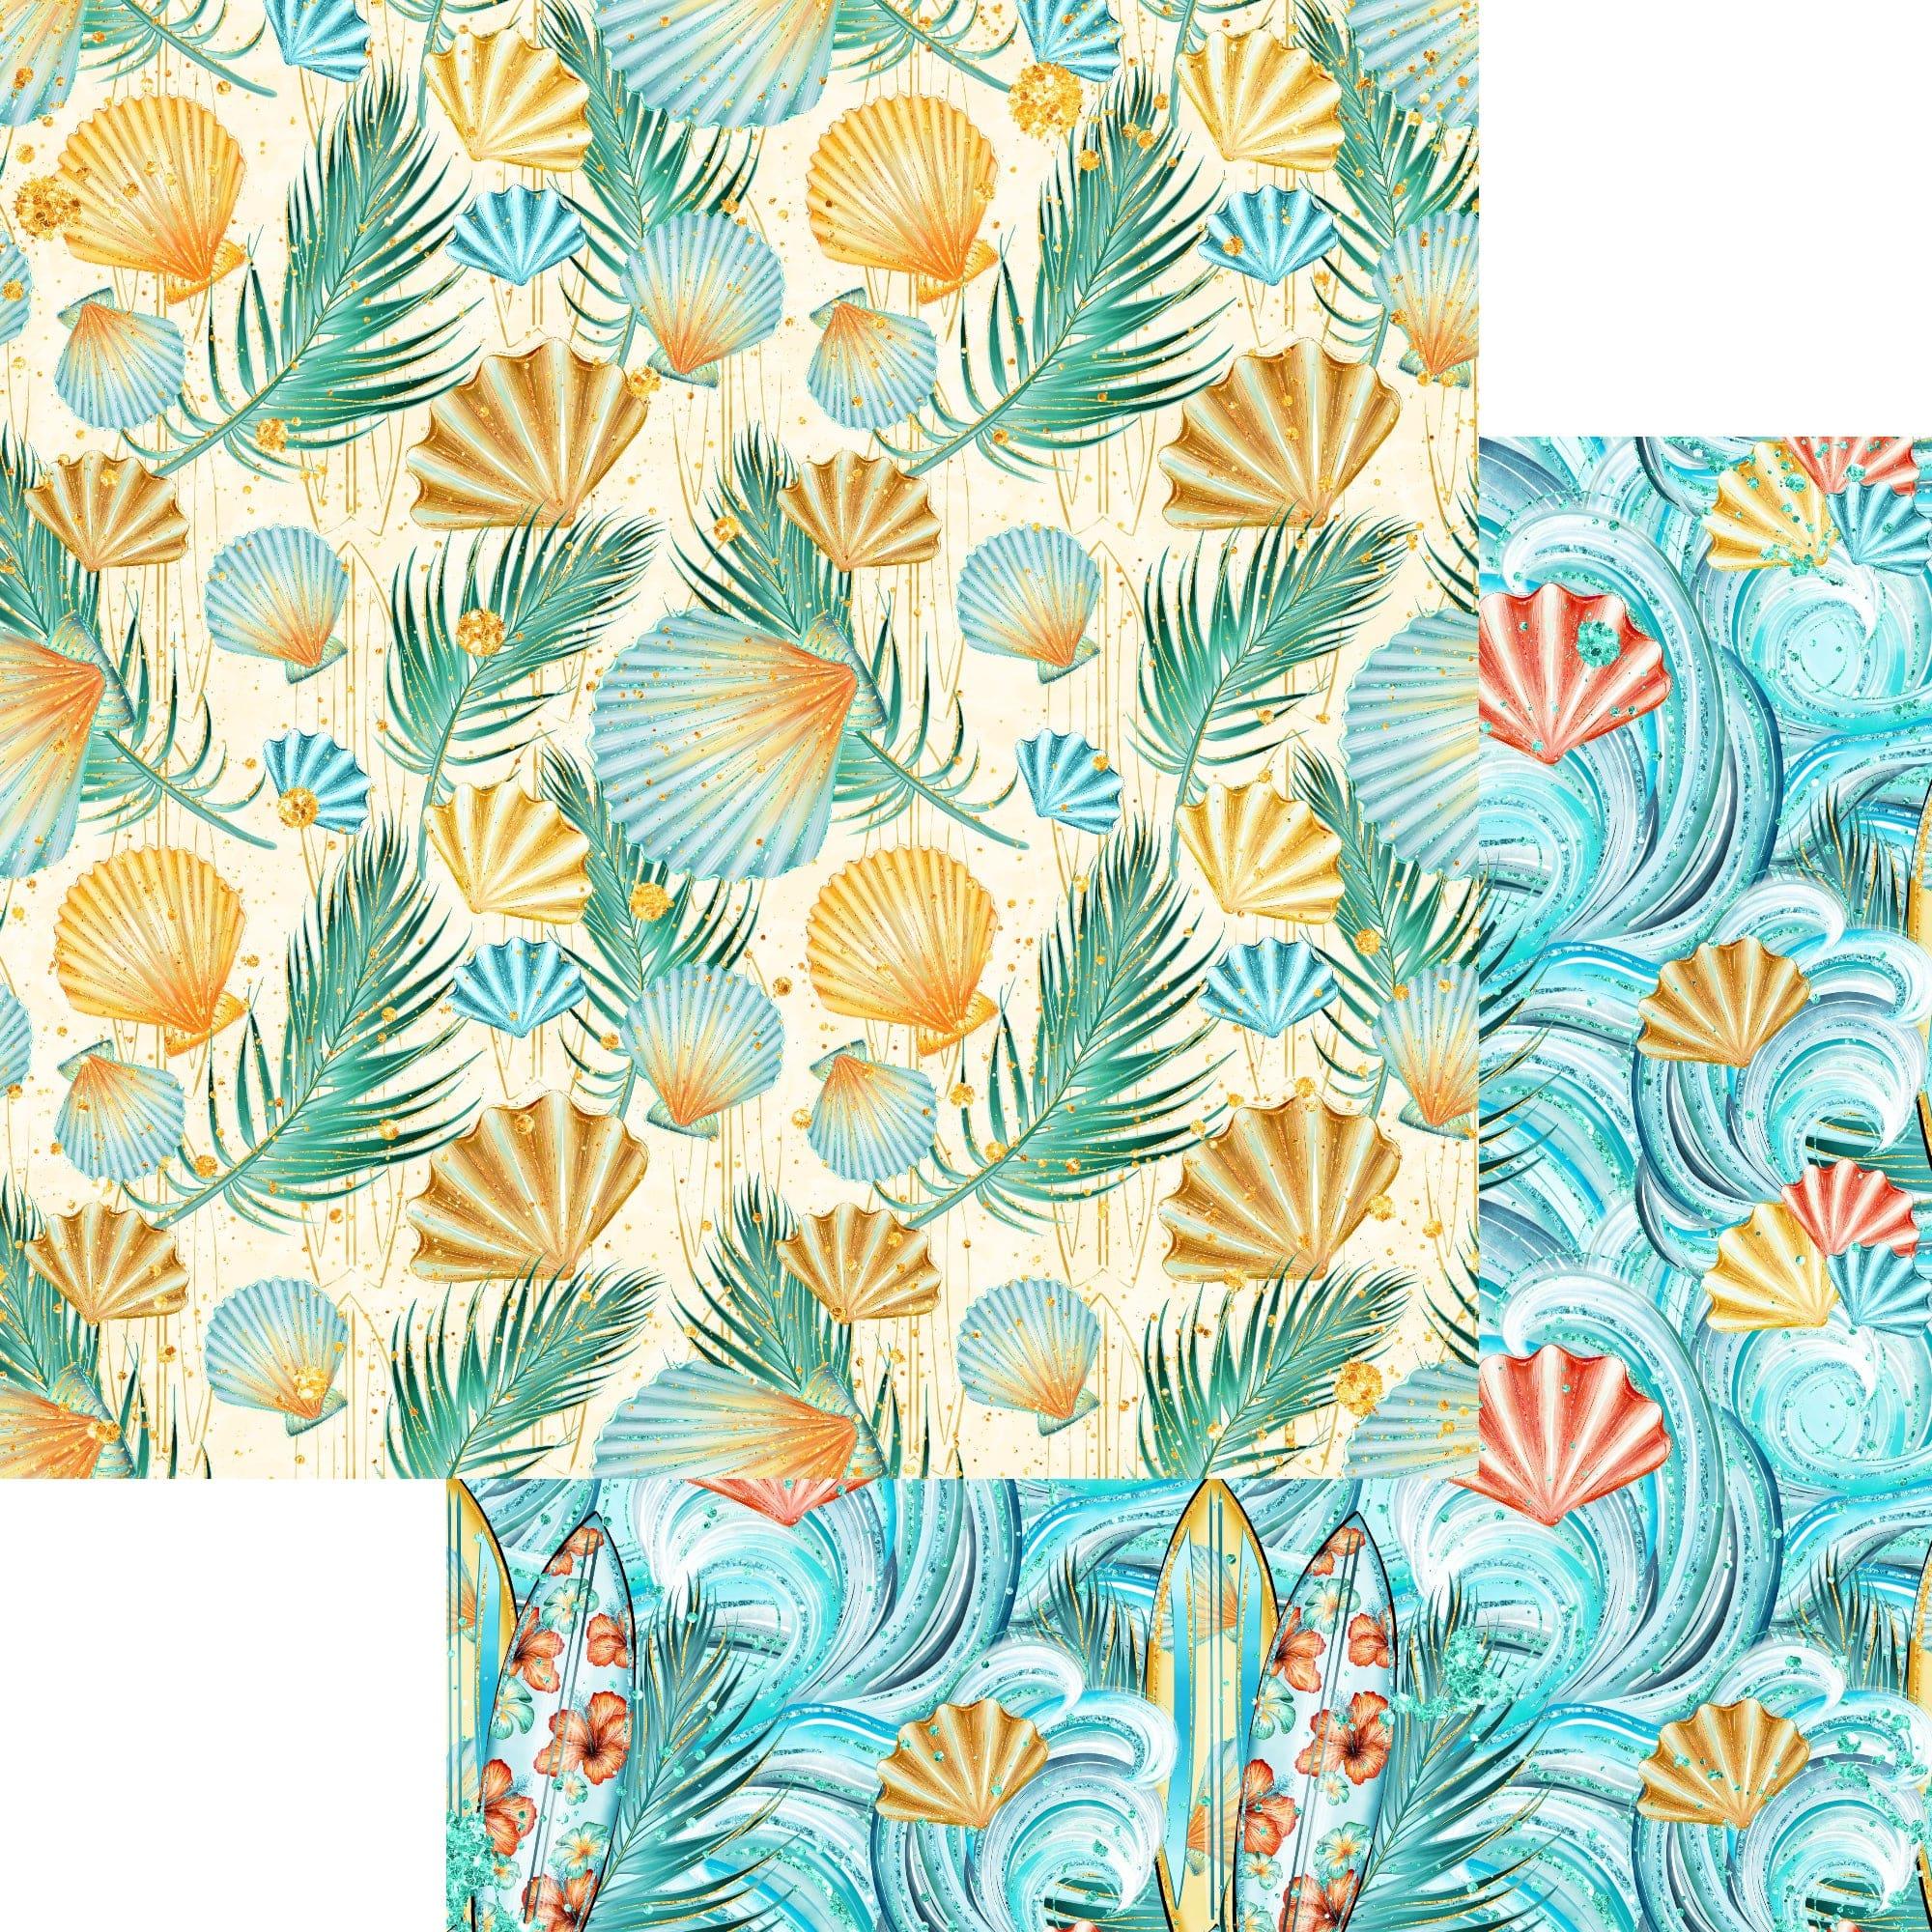 Phantasia Design's Tropics Collection Seashells 12 x 12 Double-Sided Scrapbook Paper by SSC Designs - Scrapbook Supply Companies